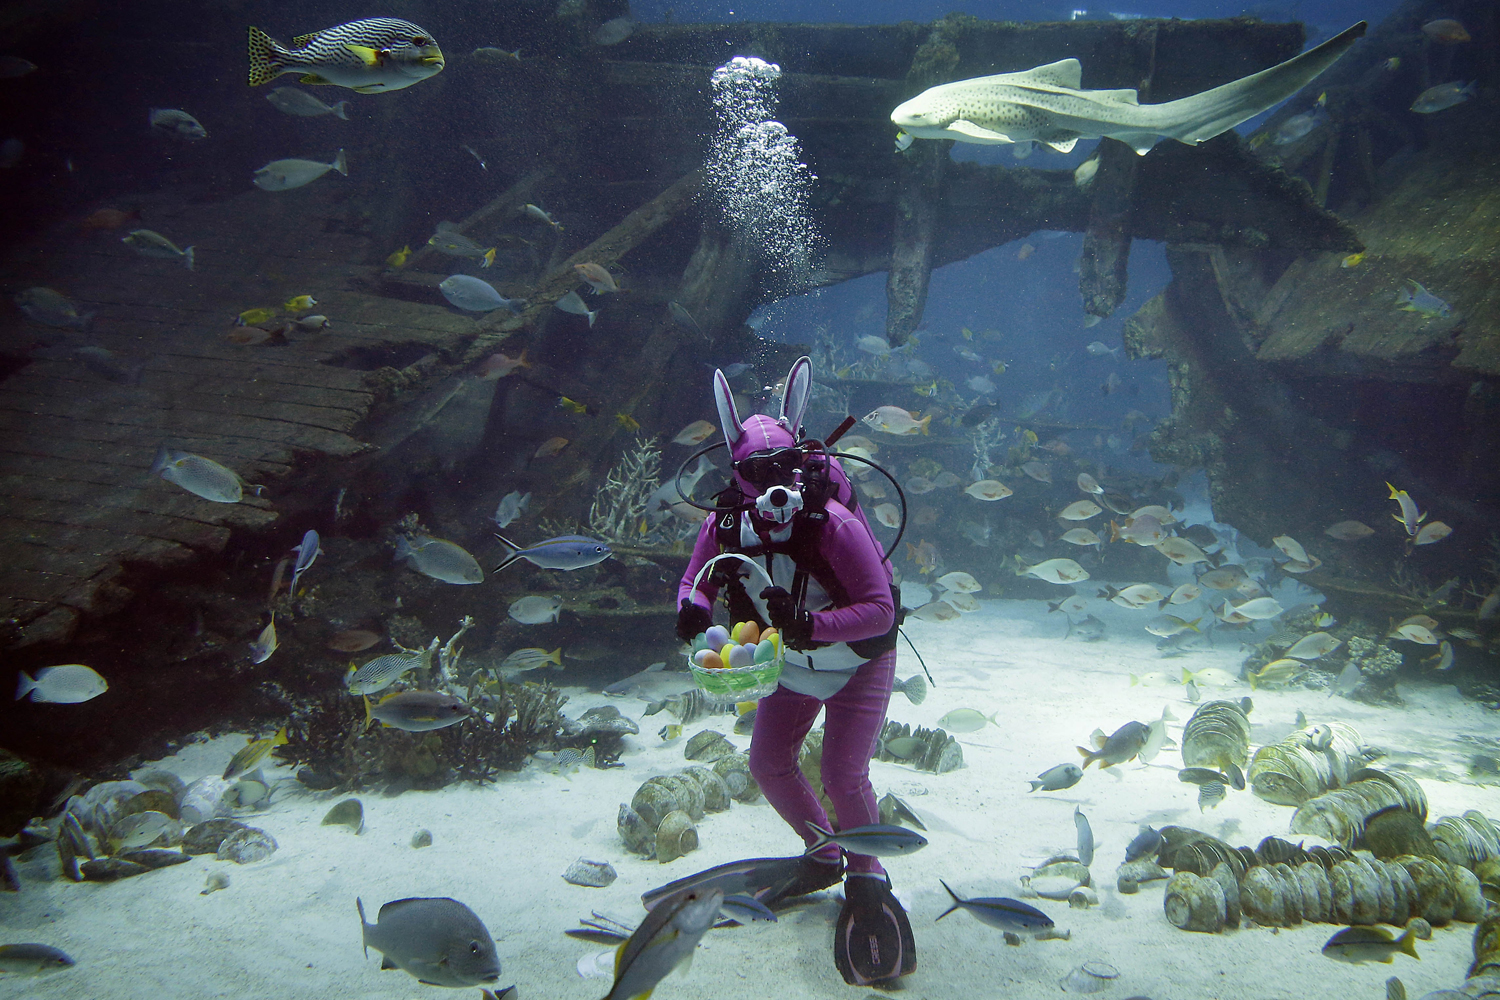 A diver dressed as the Easter Bunny swims among sharks, rays and other species of fish in the Shipwreck habitat, Thursday, April 17, 2014 at the South East Asia Aquarium of Resorts World Sentosa, a popular tourist attraction in Singapore.